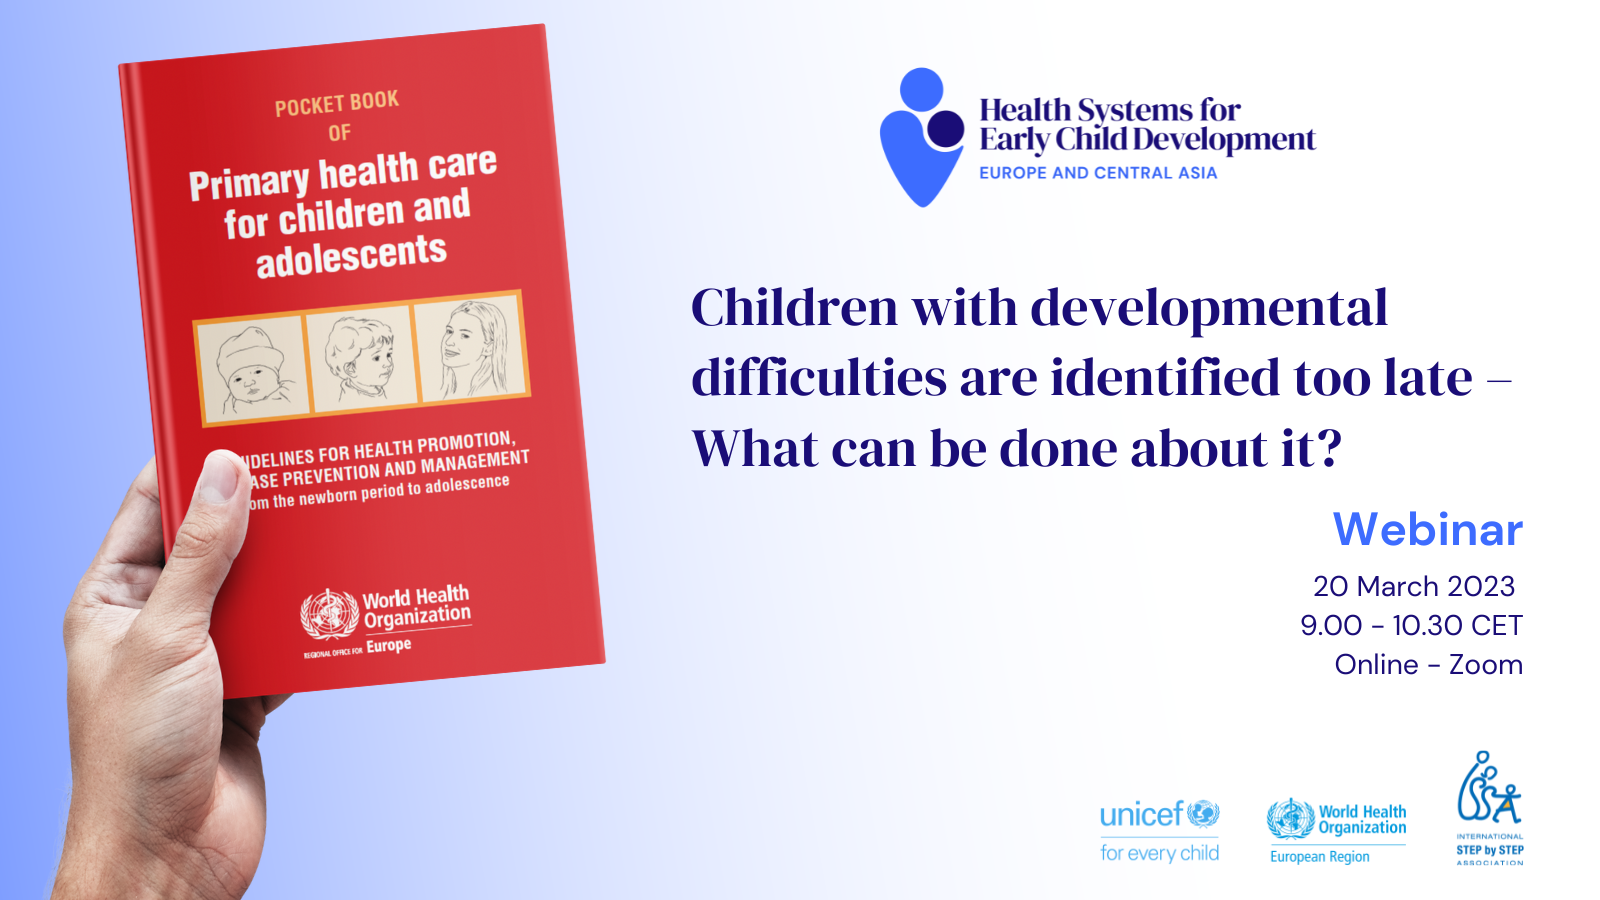 Poster - “Children with developmental difficulties are identified too late – What can be done about it?”